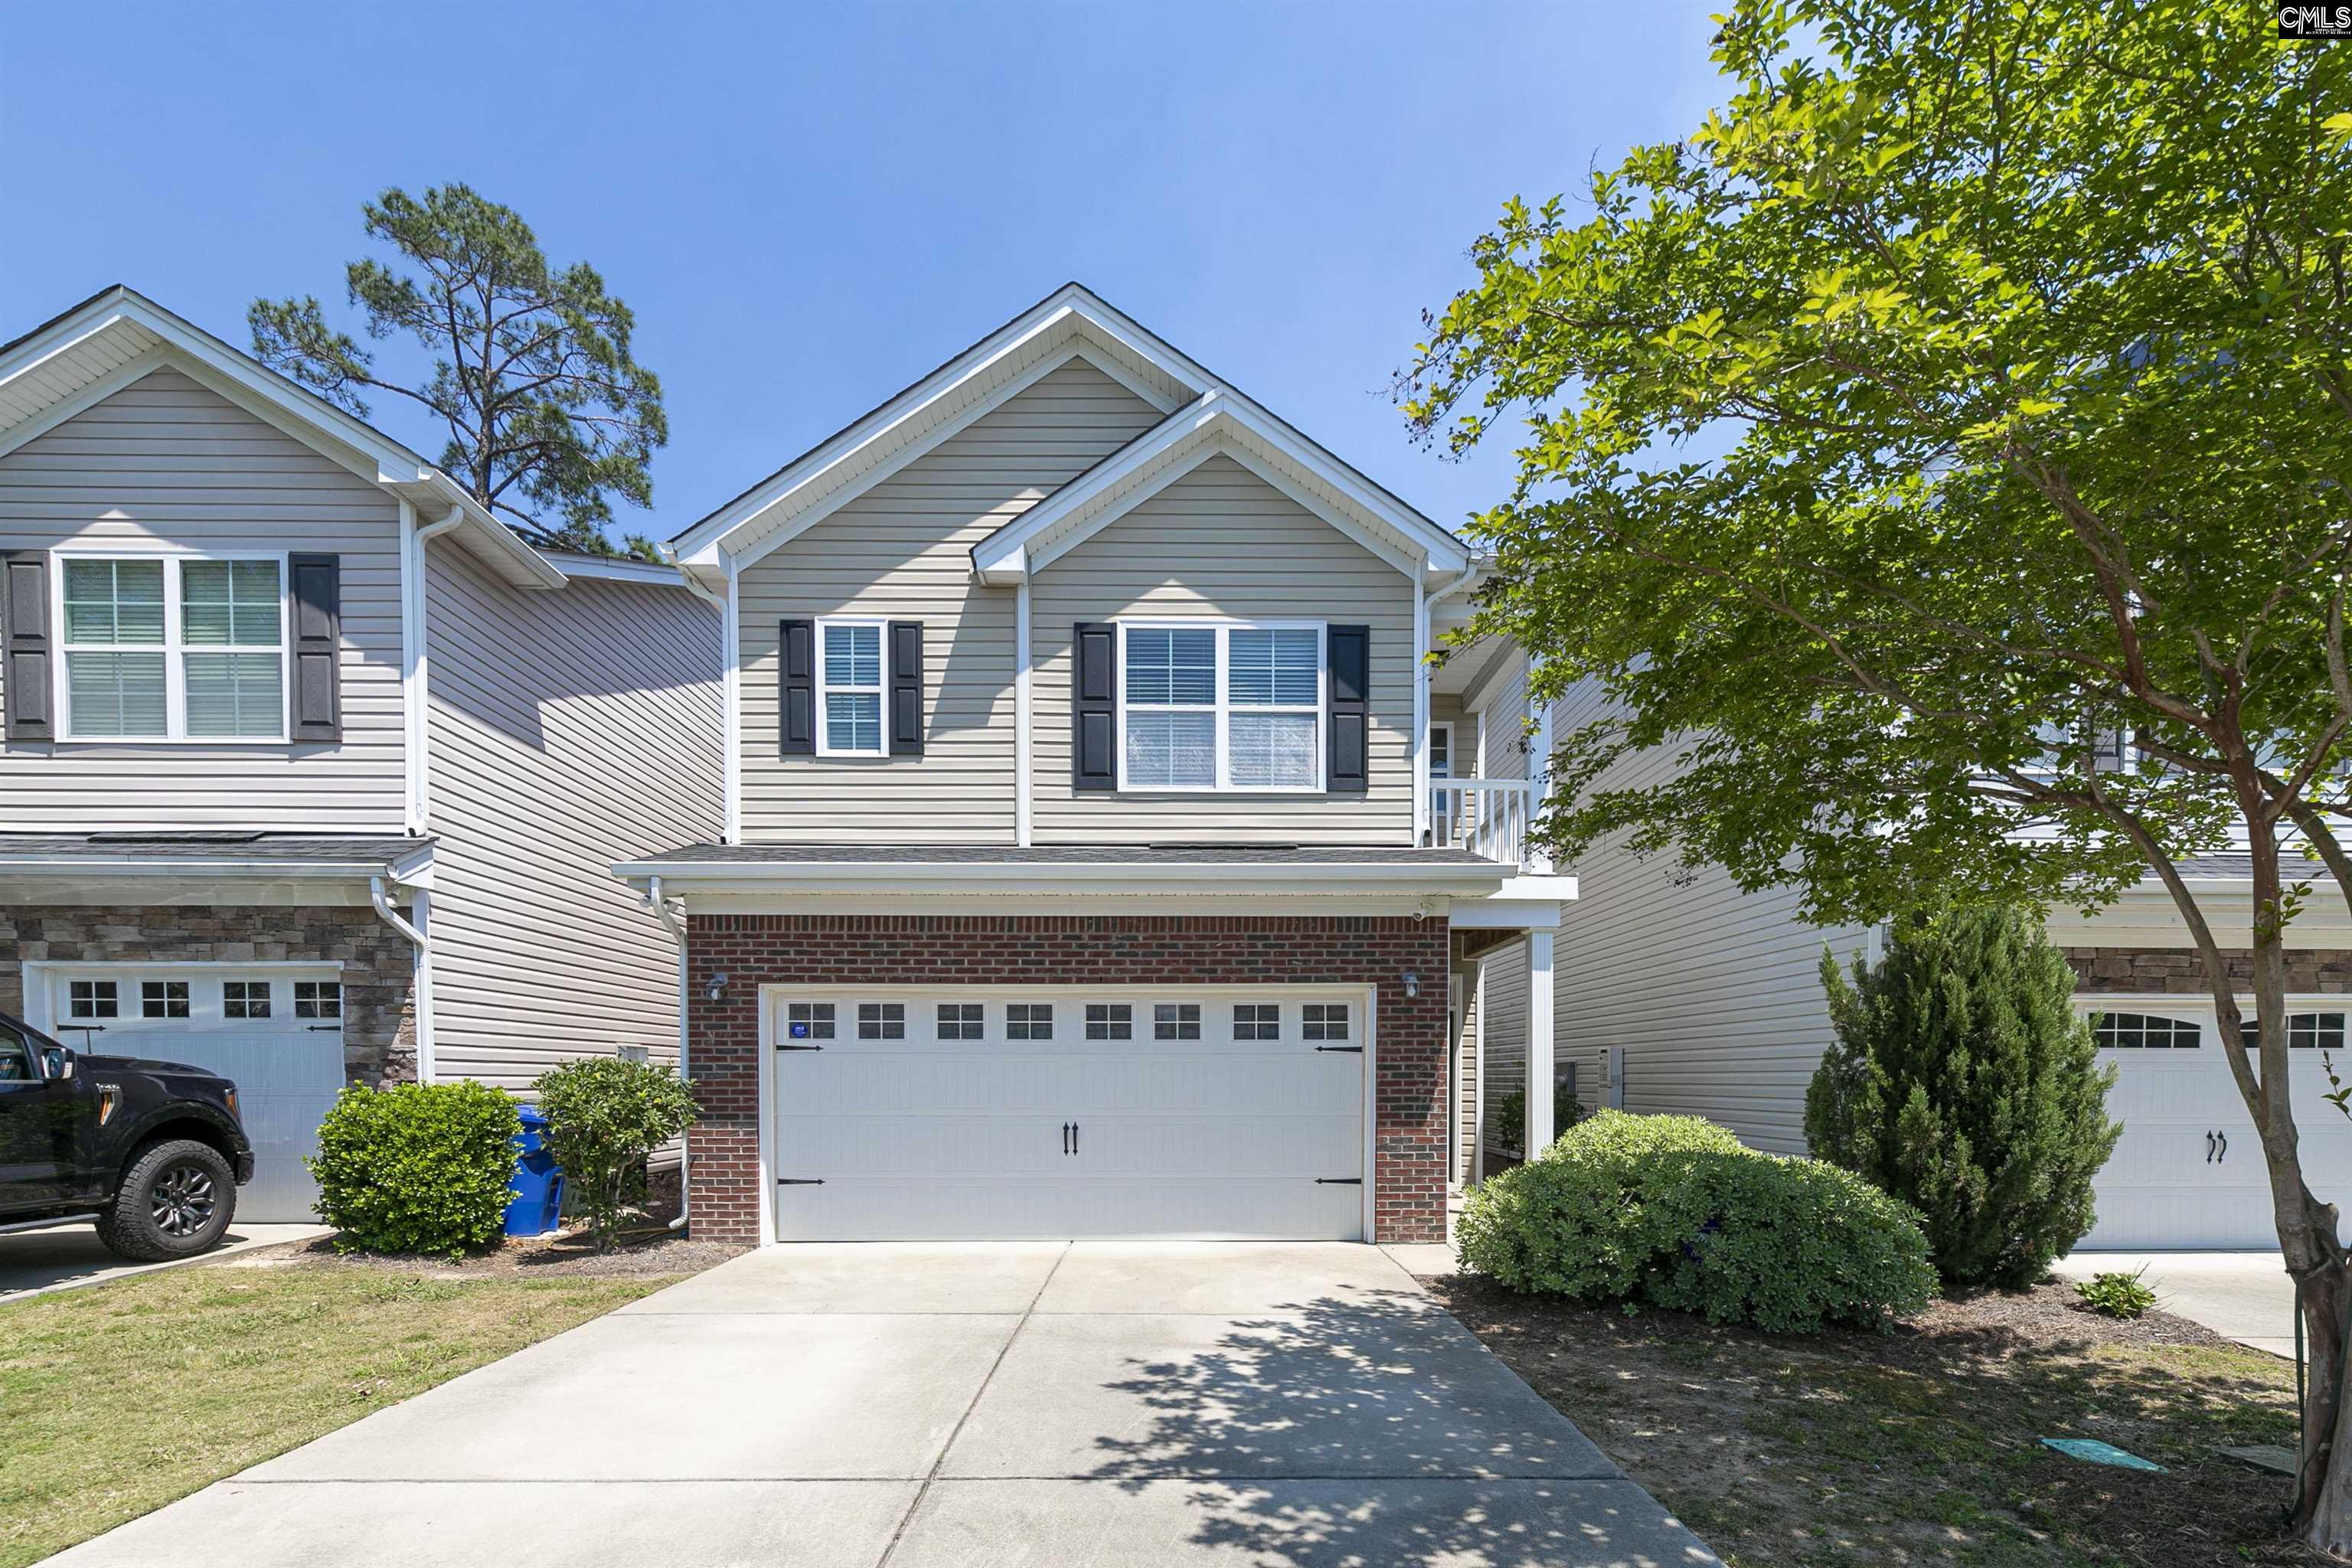 143 Top Forest Drive, Columbia, SC 29209 Listing Photo 1